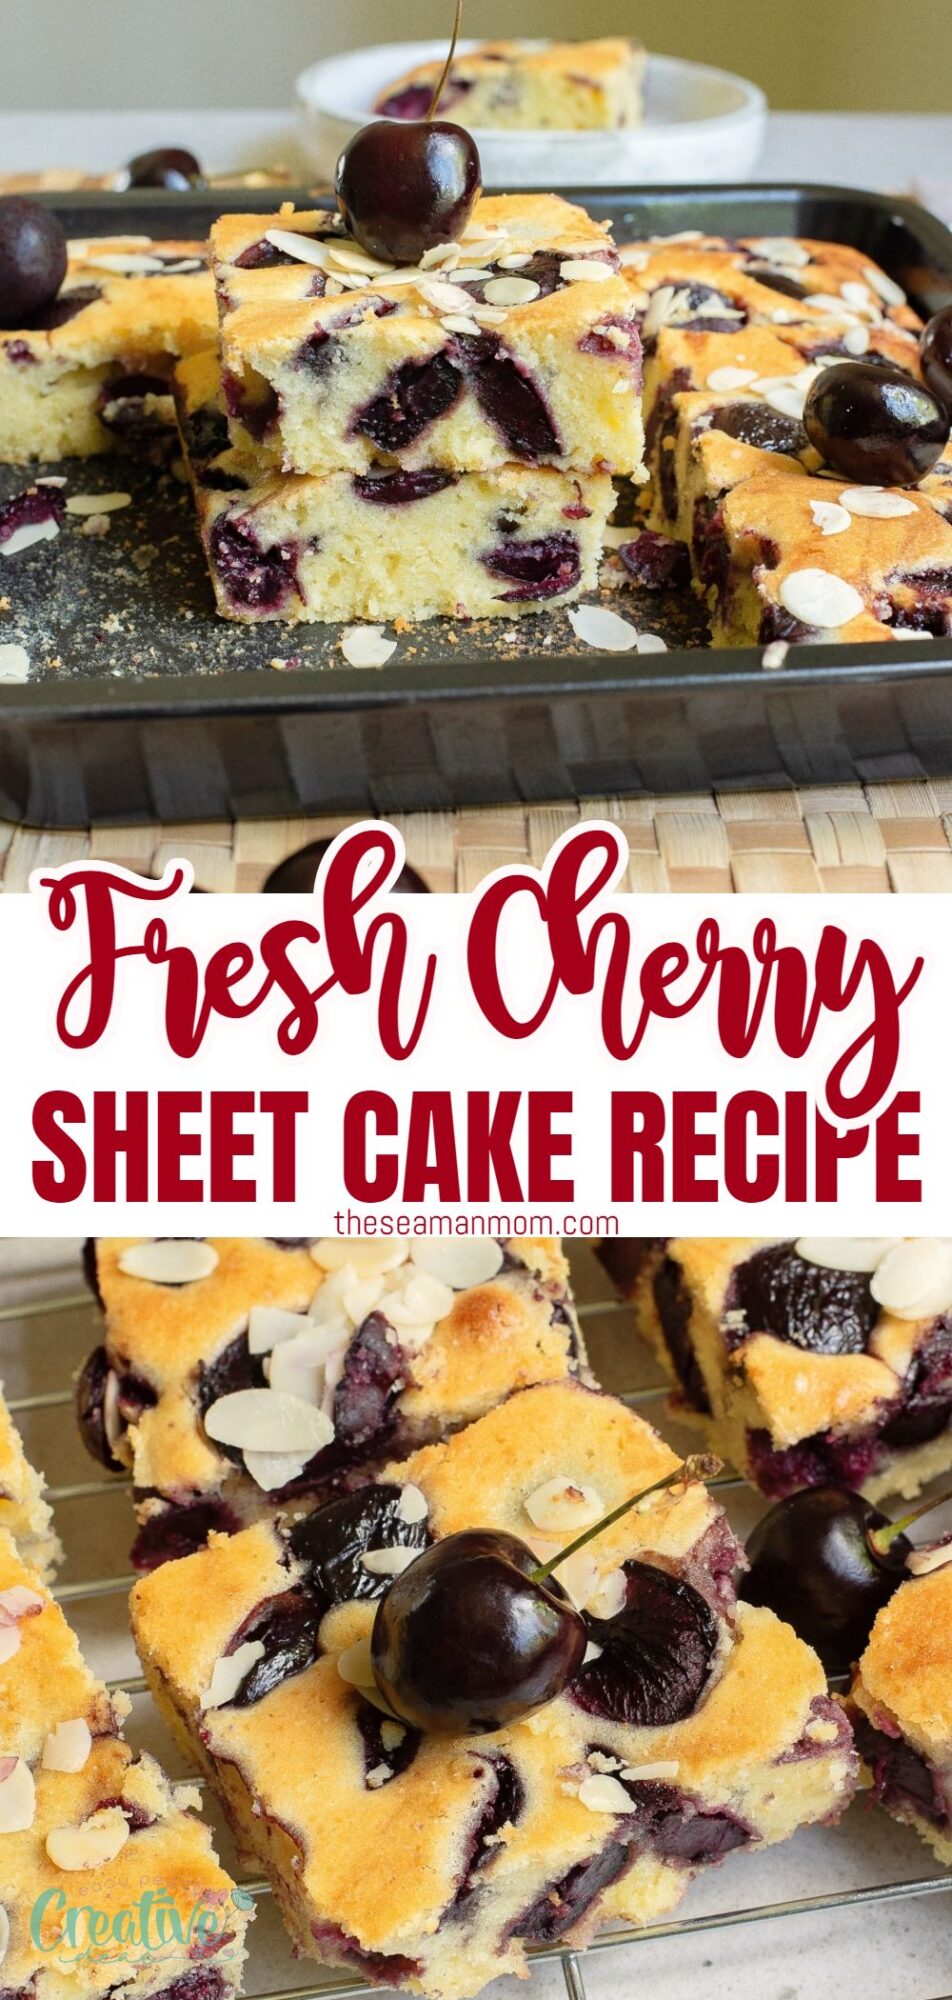 A delectable cherry sheet cake adorned with juicy cherries and crunchy almonds, a perfect treat for any occasion!